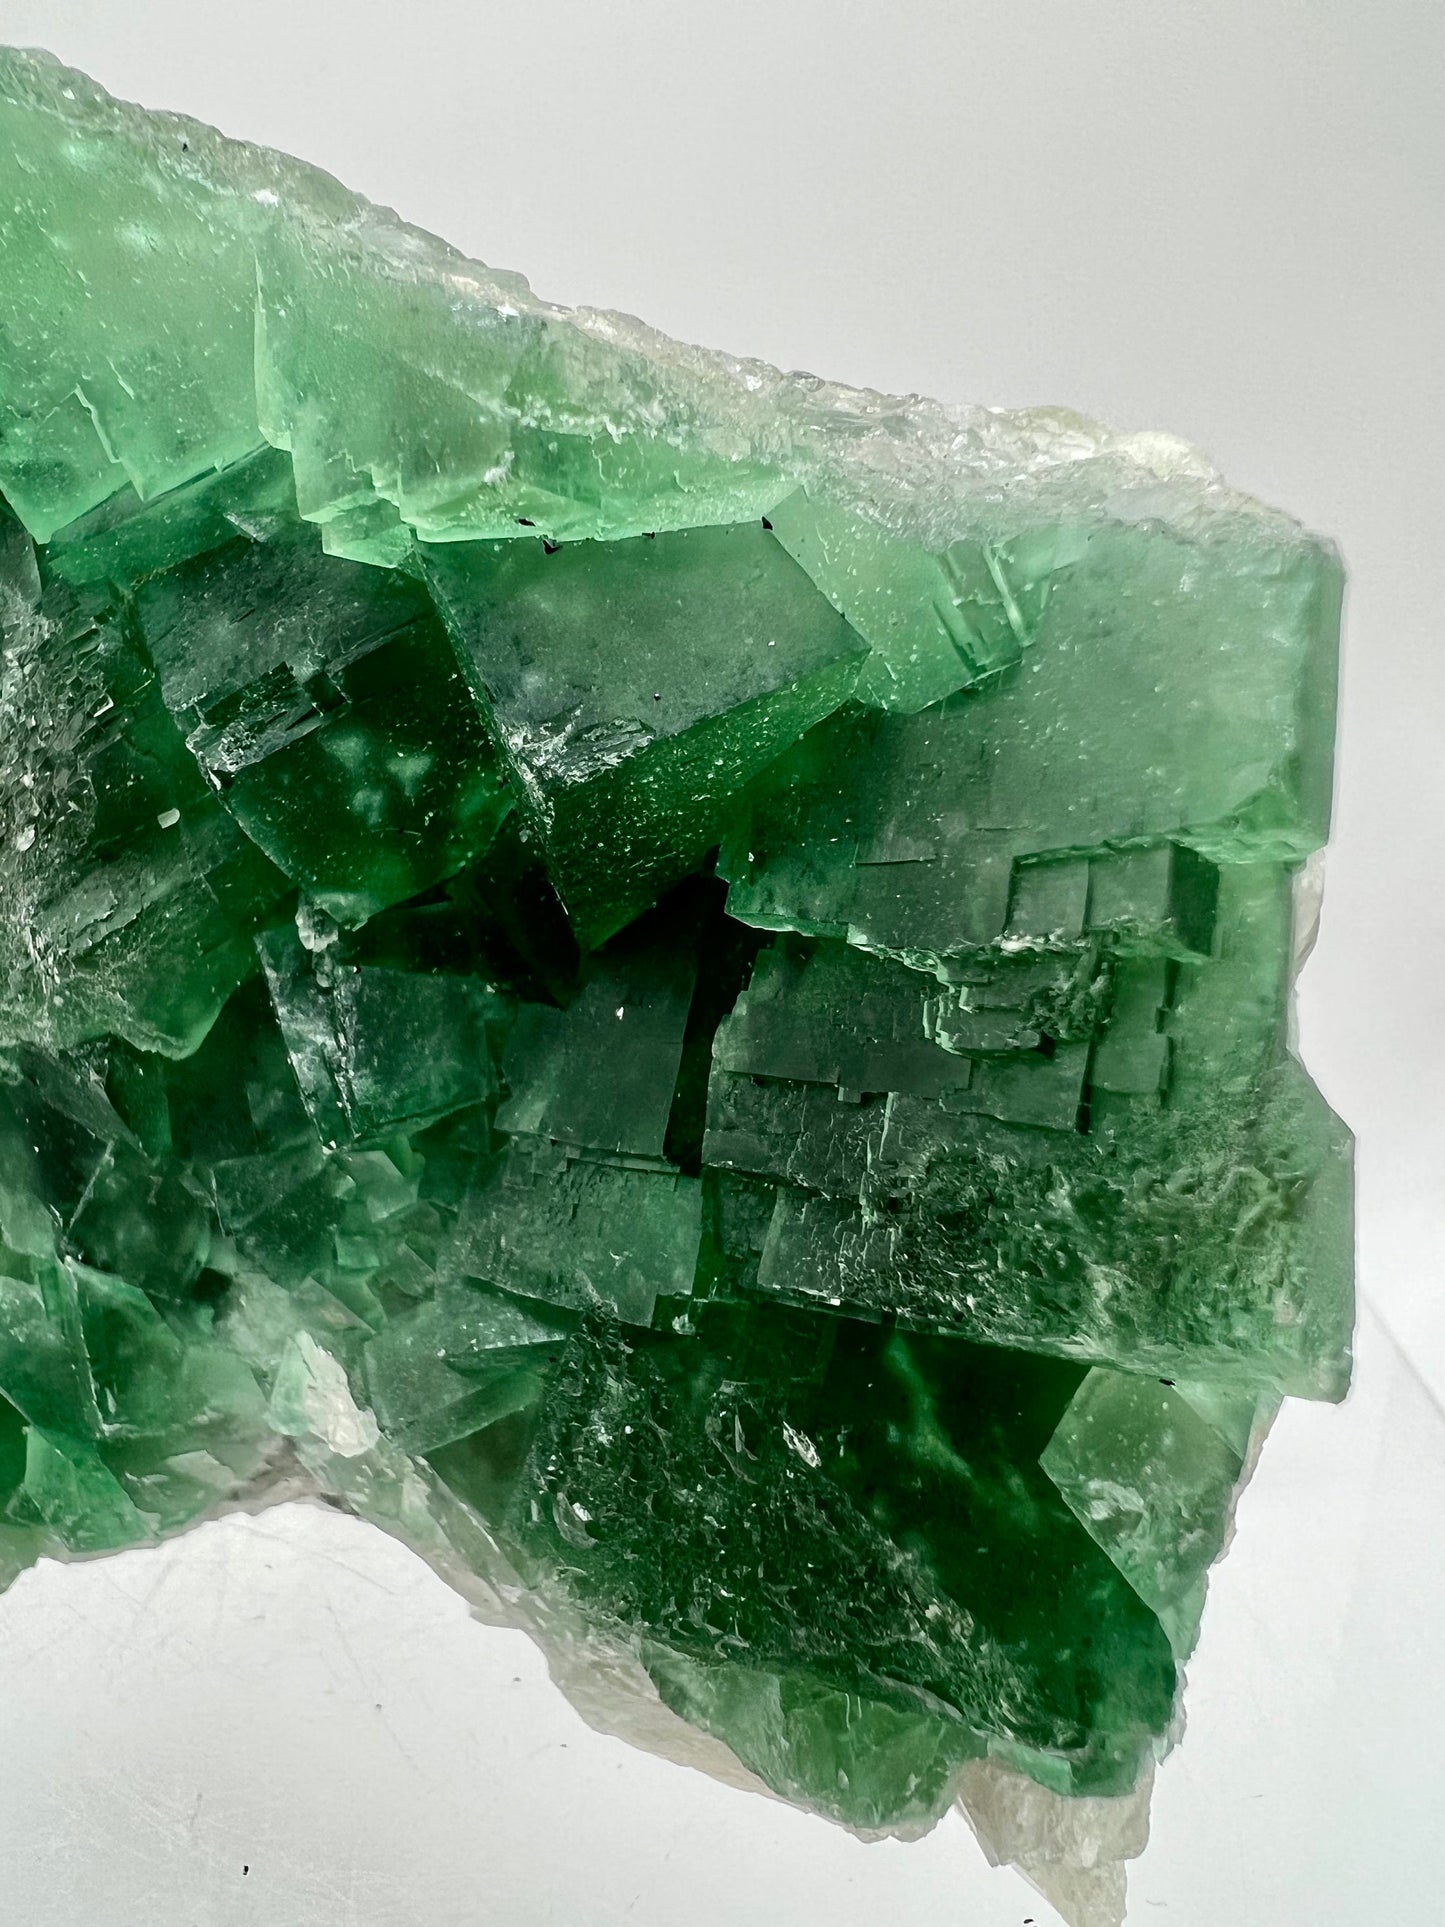 Deep Green Fluorite Cubes Specimen. 1.3 lbs. Rare And Beautiful Apple Green Fluorite. Incredible Crystal Cluster!